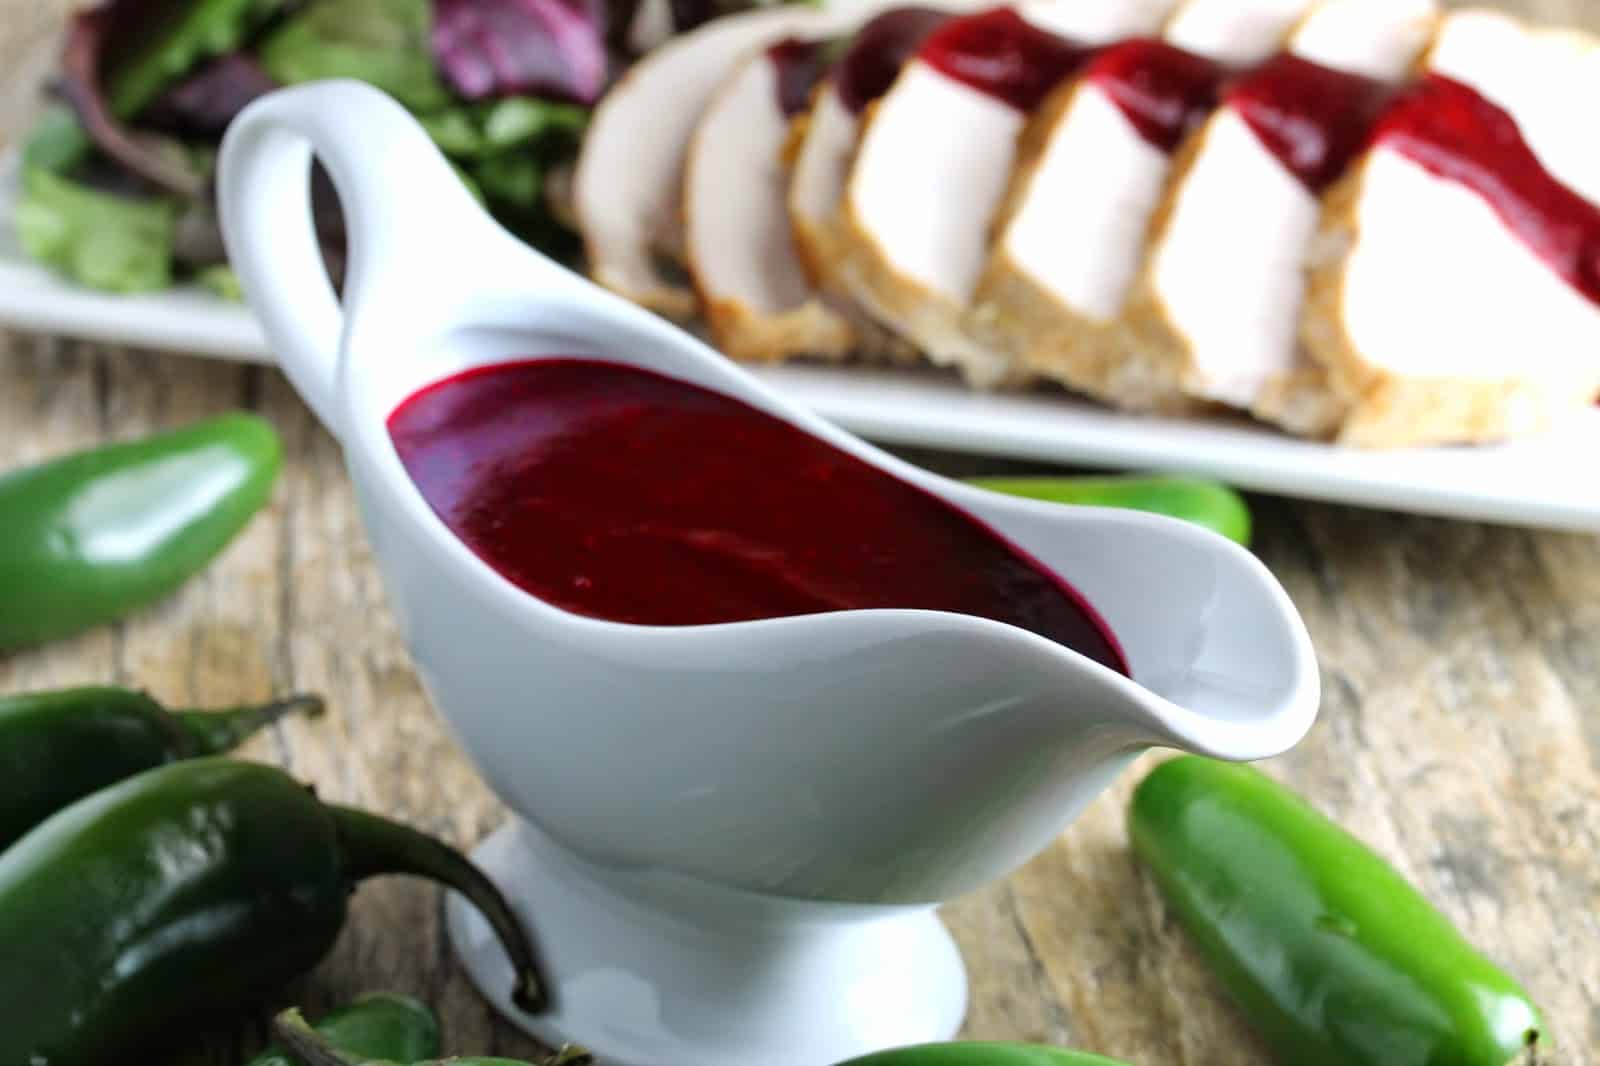 Jalapeno Cranberry Sauce in the background is drizzled over turkey breast on a platter with salad greens. A gravy boat full of Jalapeno Cranberry Sauce in the foreground surrounded by fresh jalapenos.